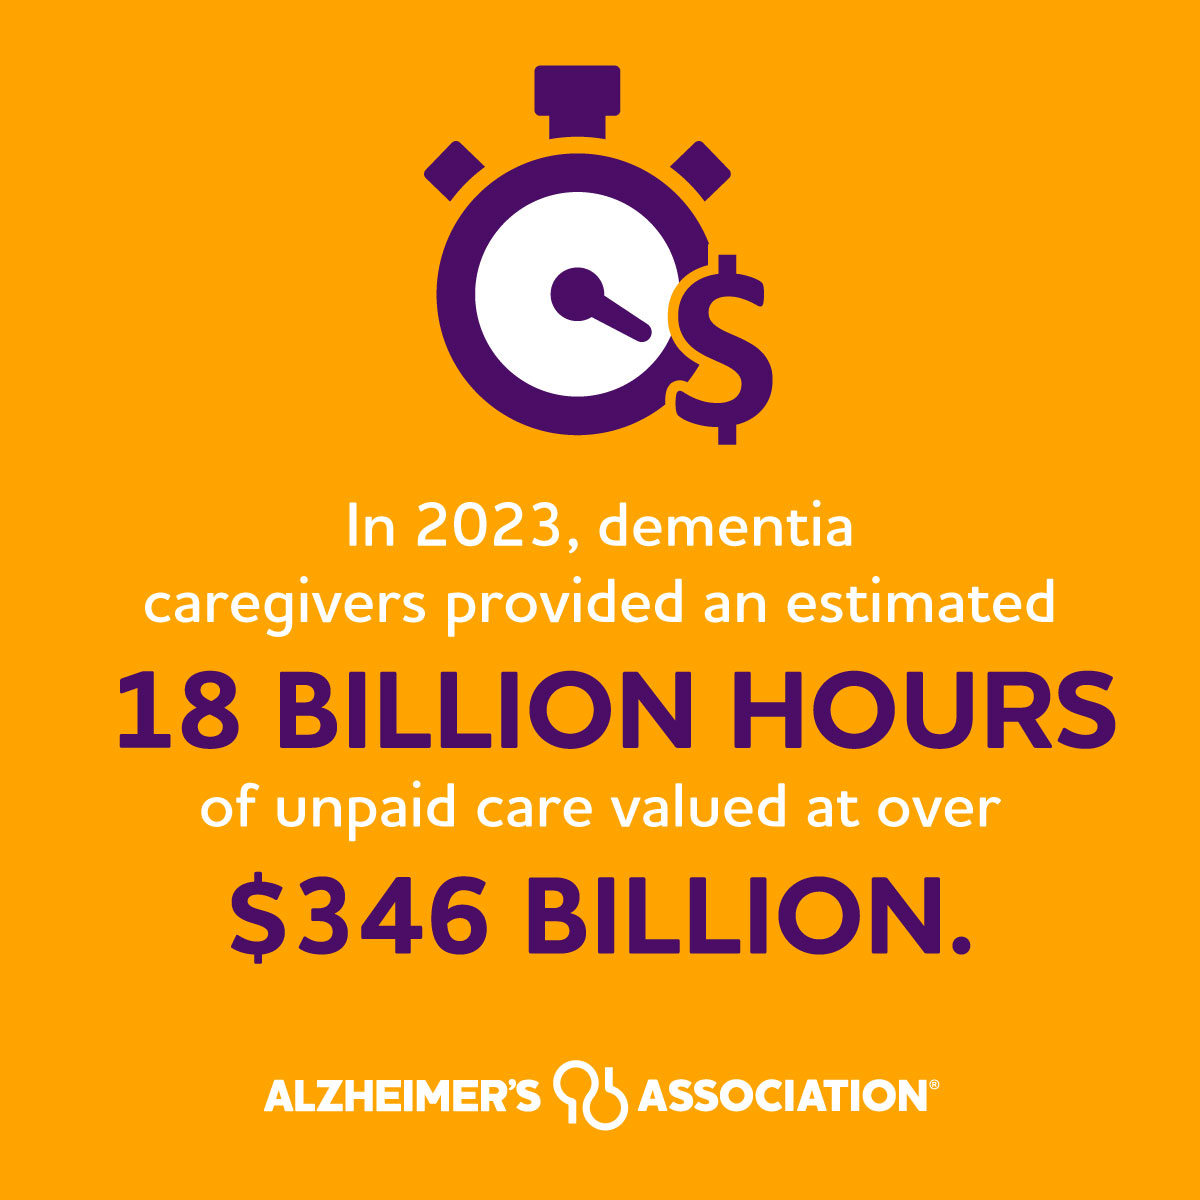 Alzheimer’s and other dementia are hurting our communities and the economy. Share the facts: alz.org/facts. #AlzheimersInAmerica #ENDALZ